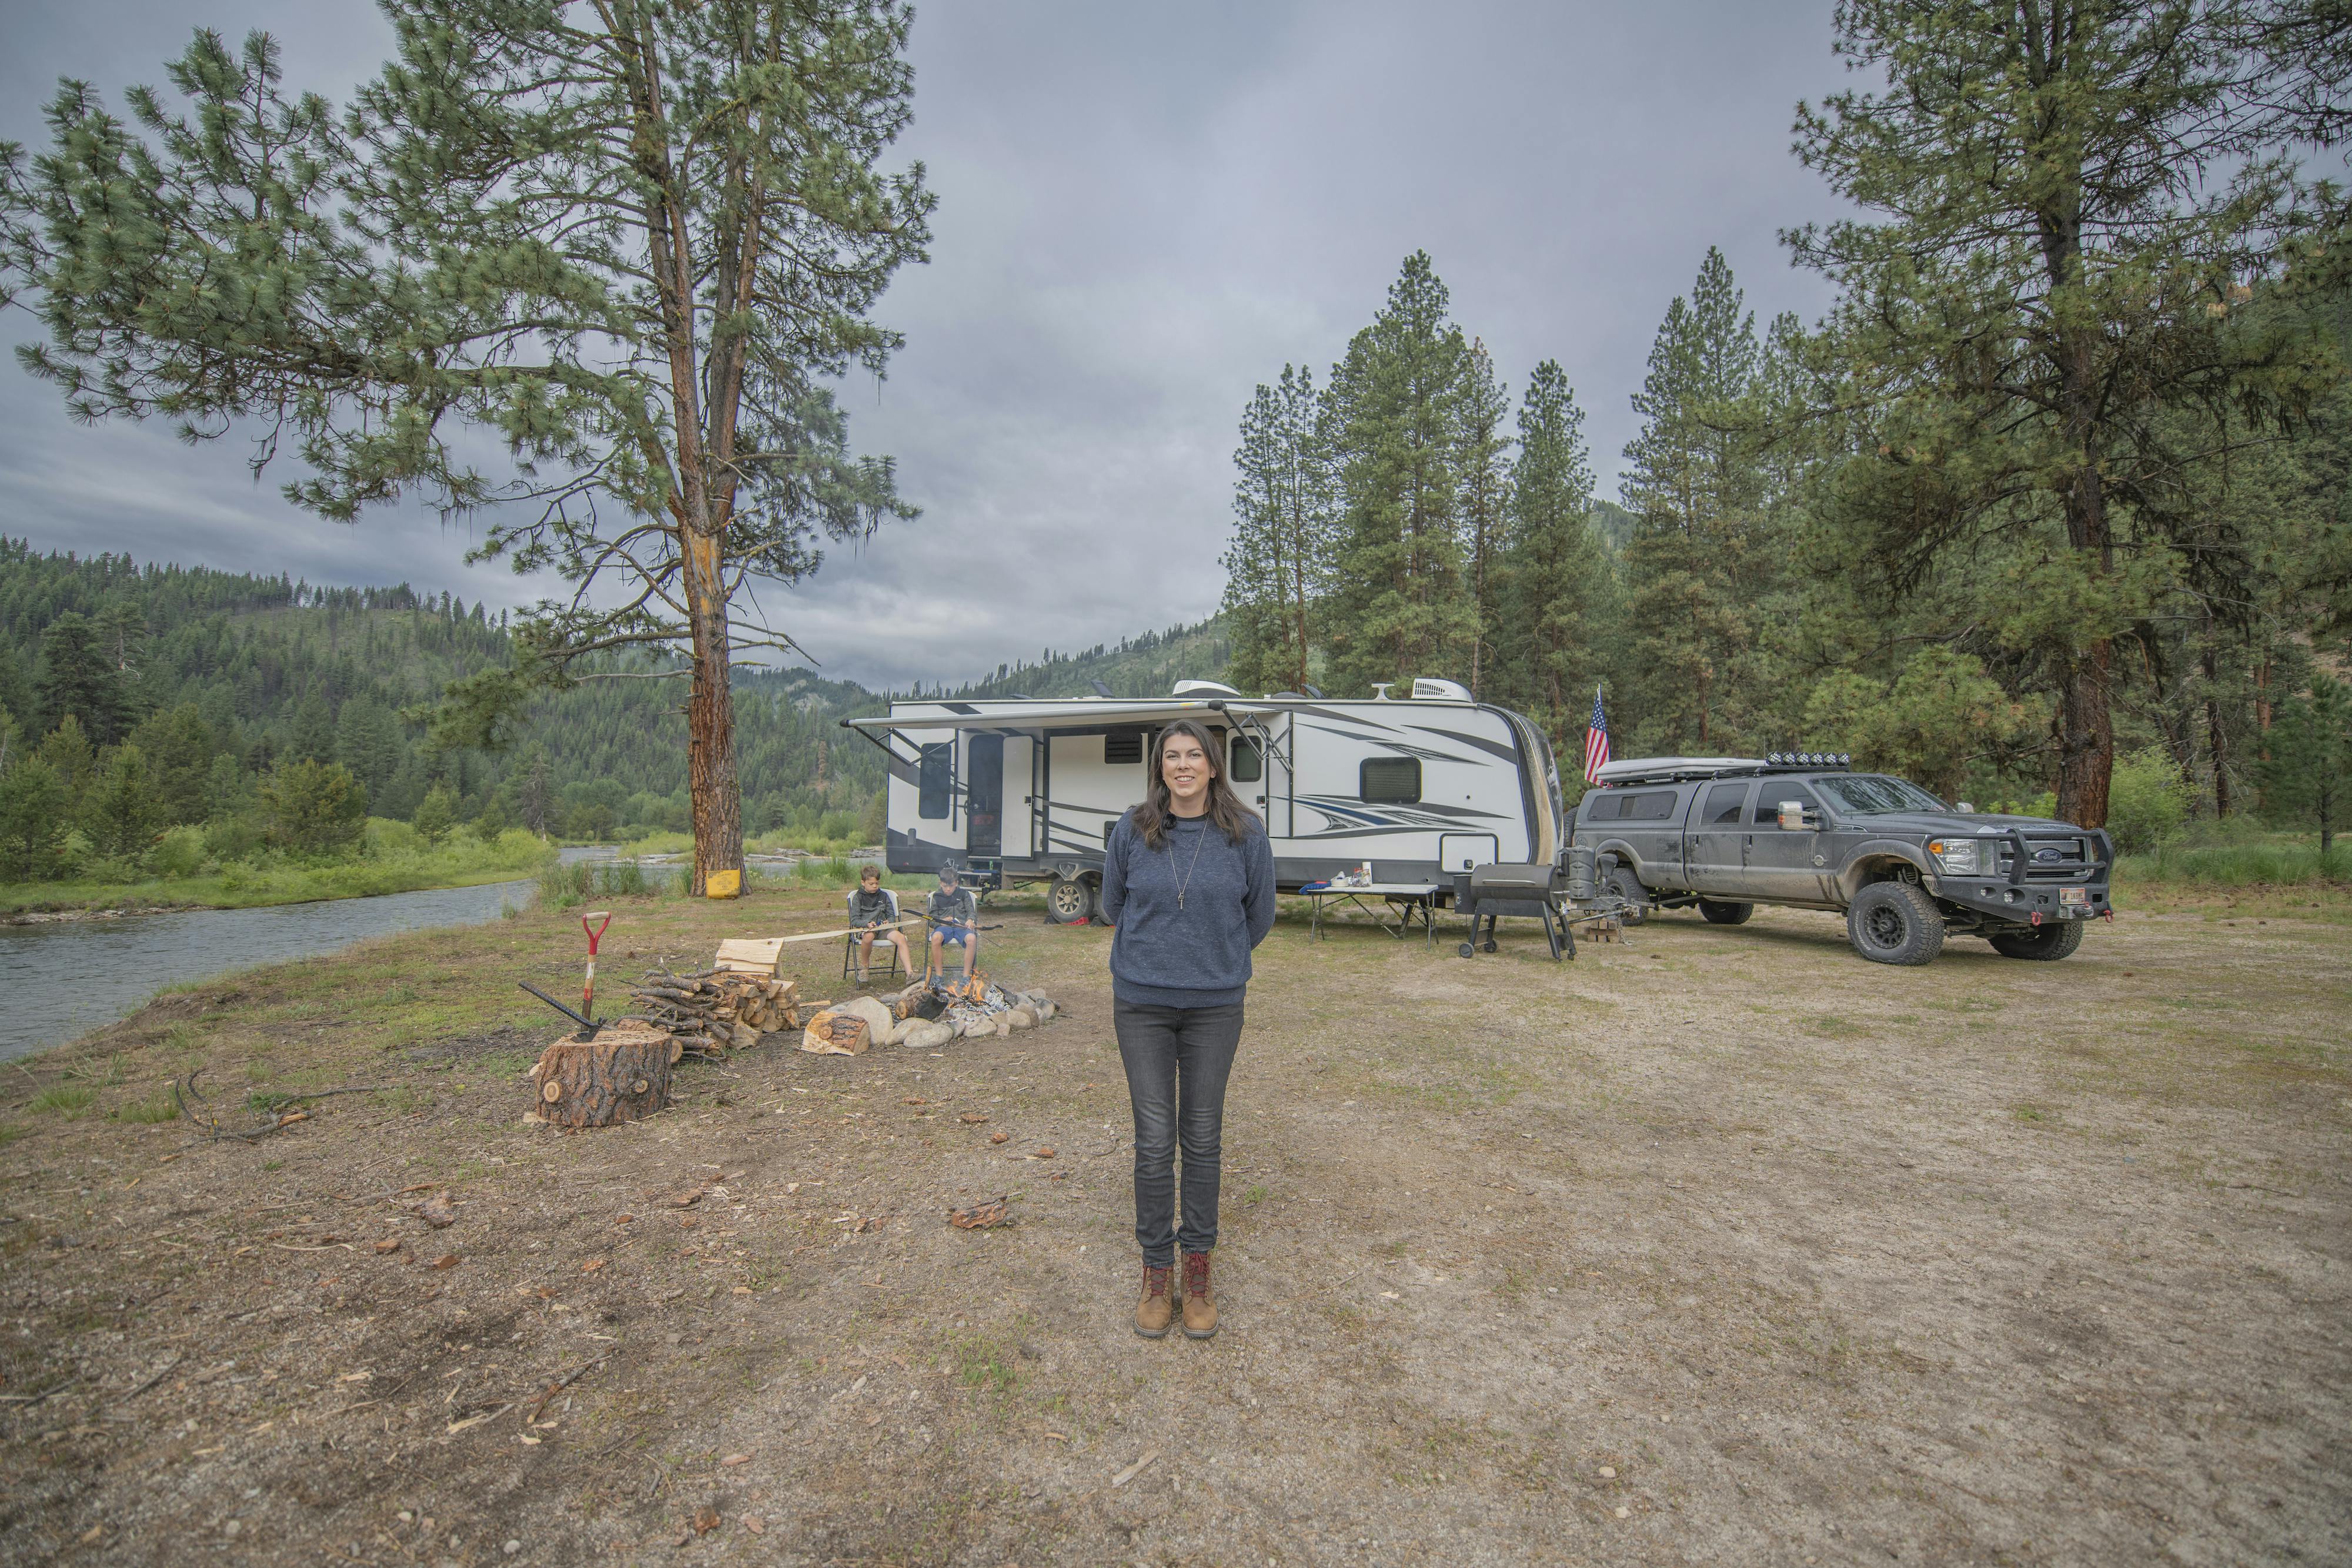 Chelsea Day standing in front of her boondocking camping location